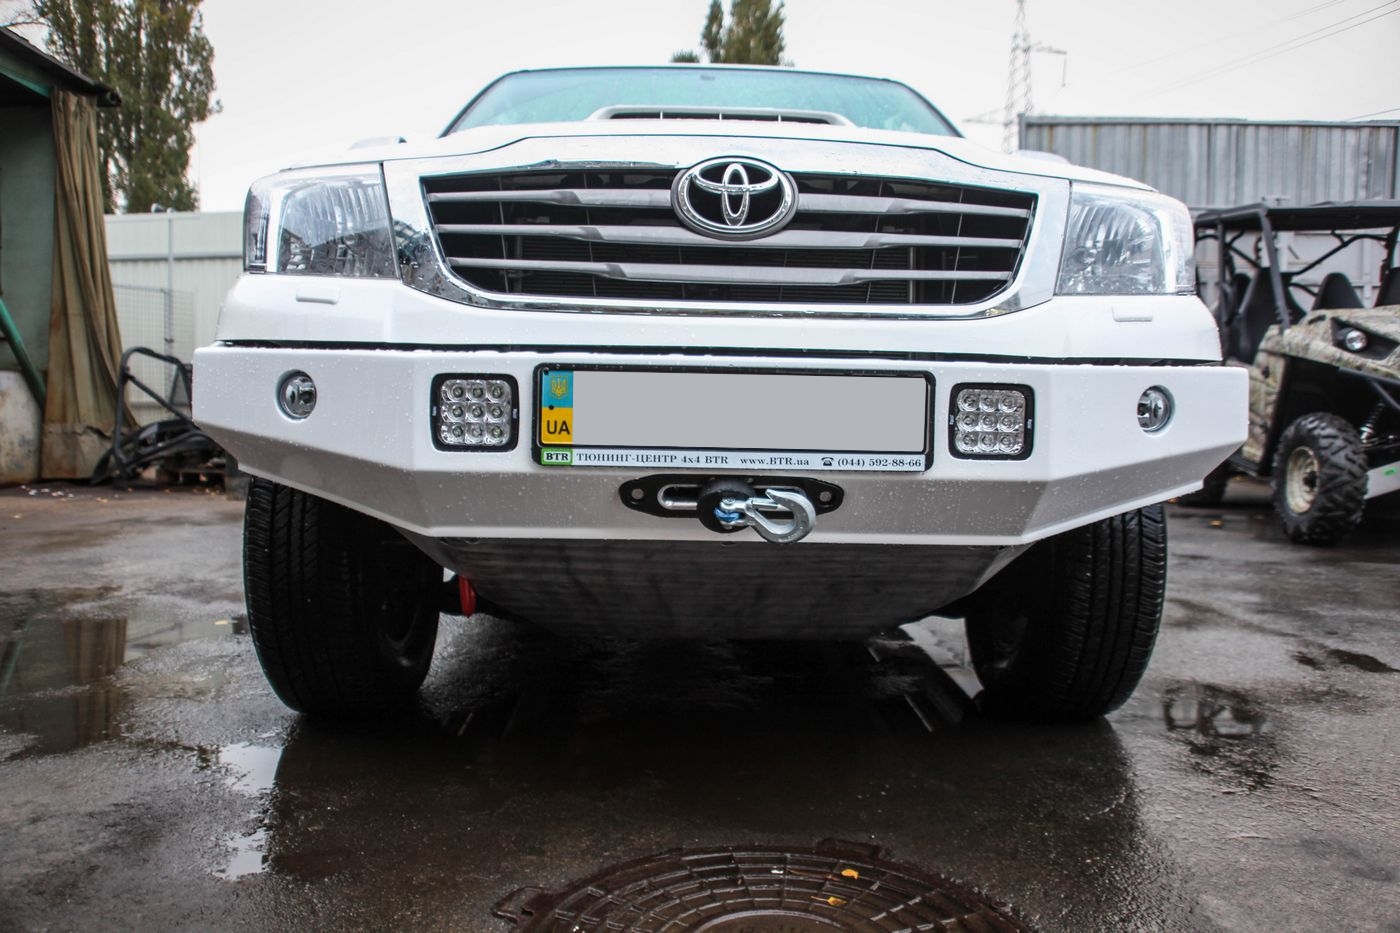 Toyota-HiLux-Tuning-2013_16